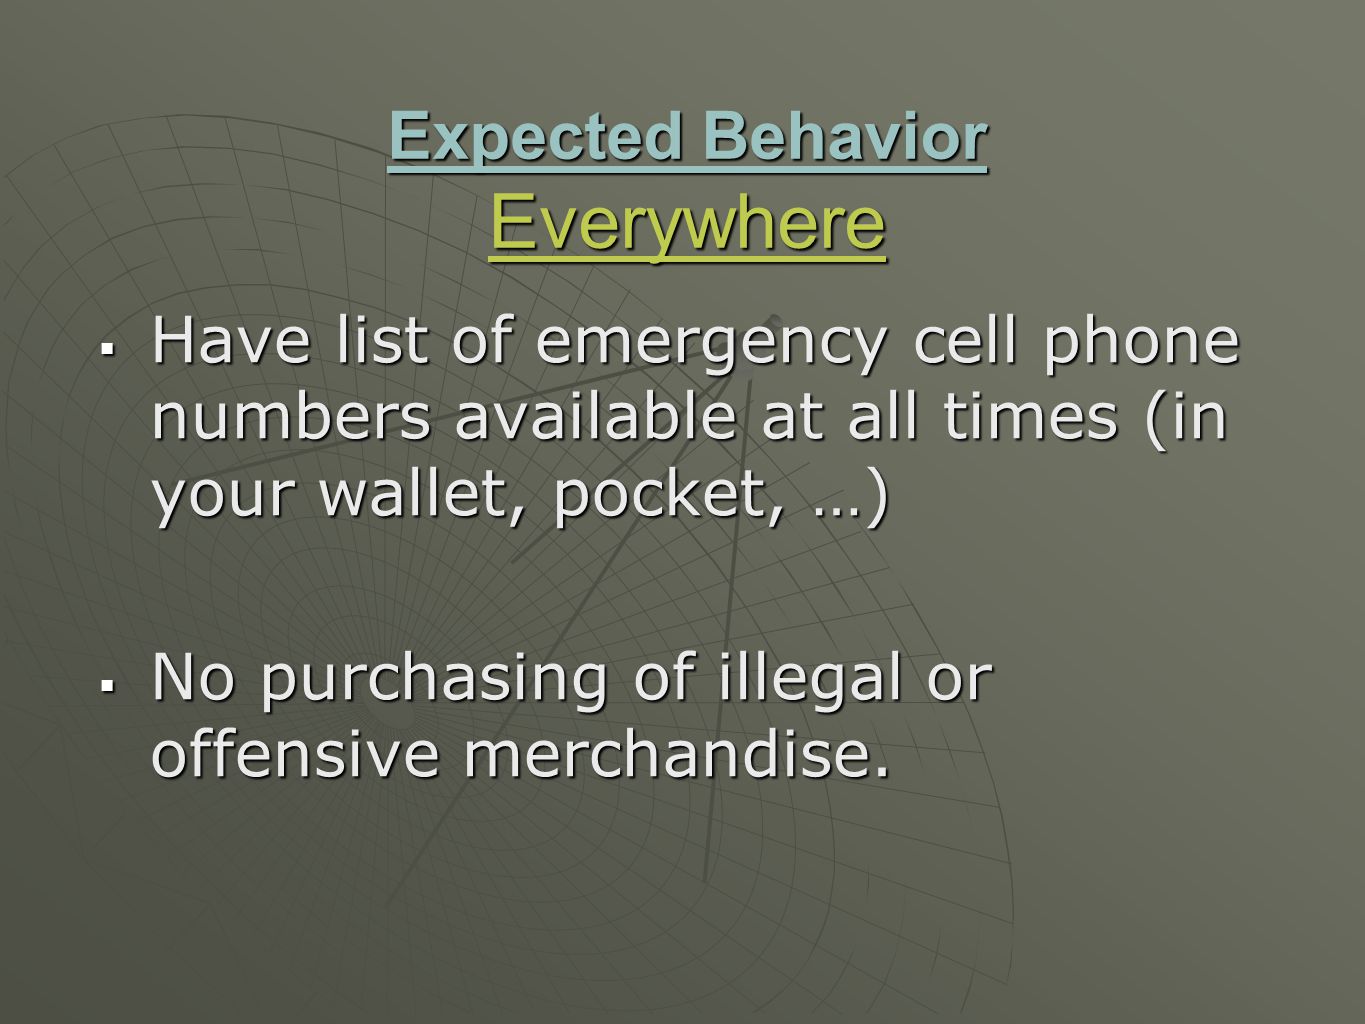 Expected Behavior Everywhere  Have list of emergency cell phone numbers available at all times (in your wallet, pocket, …)  No purchasing of illegal or offensive merchandise.